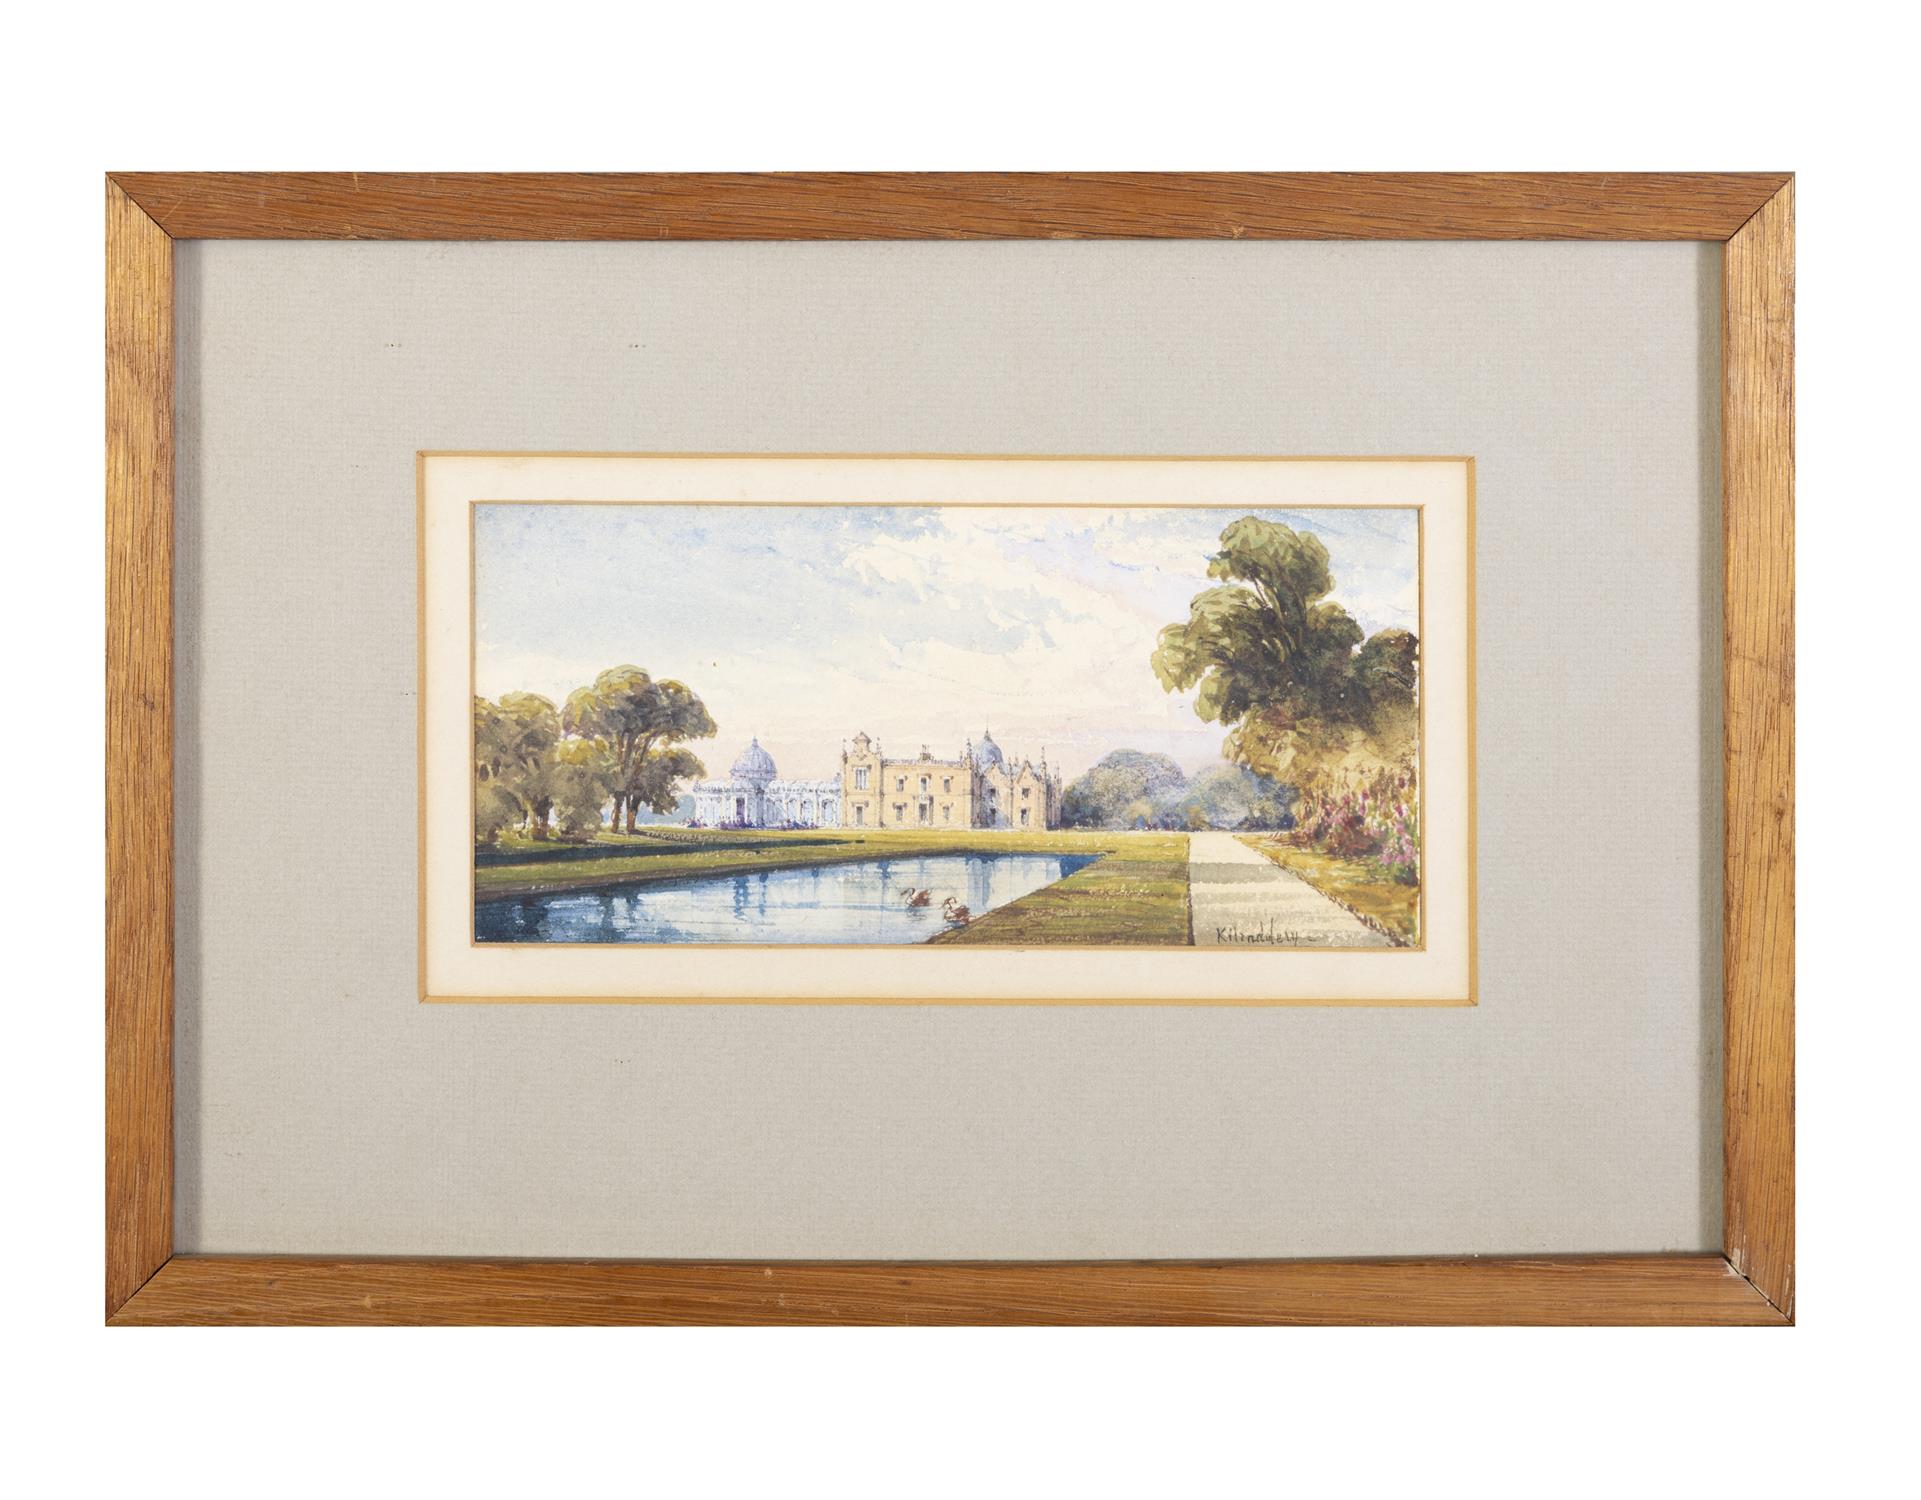 Consalvo Carelli (1818 - 1900) A View of Kilruddery House, Bray, Co. Wicklow Watercolour, - Image 2 of 4